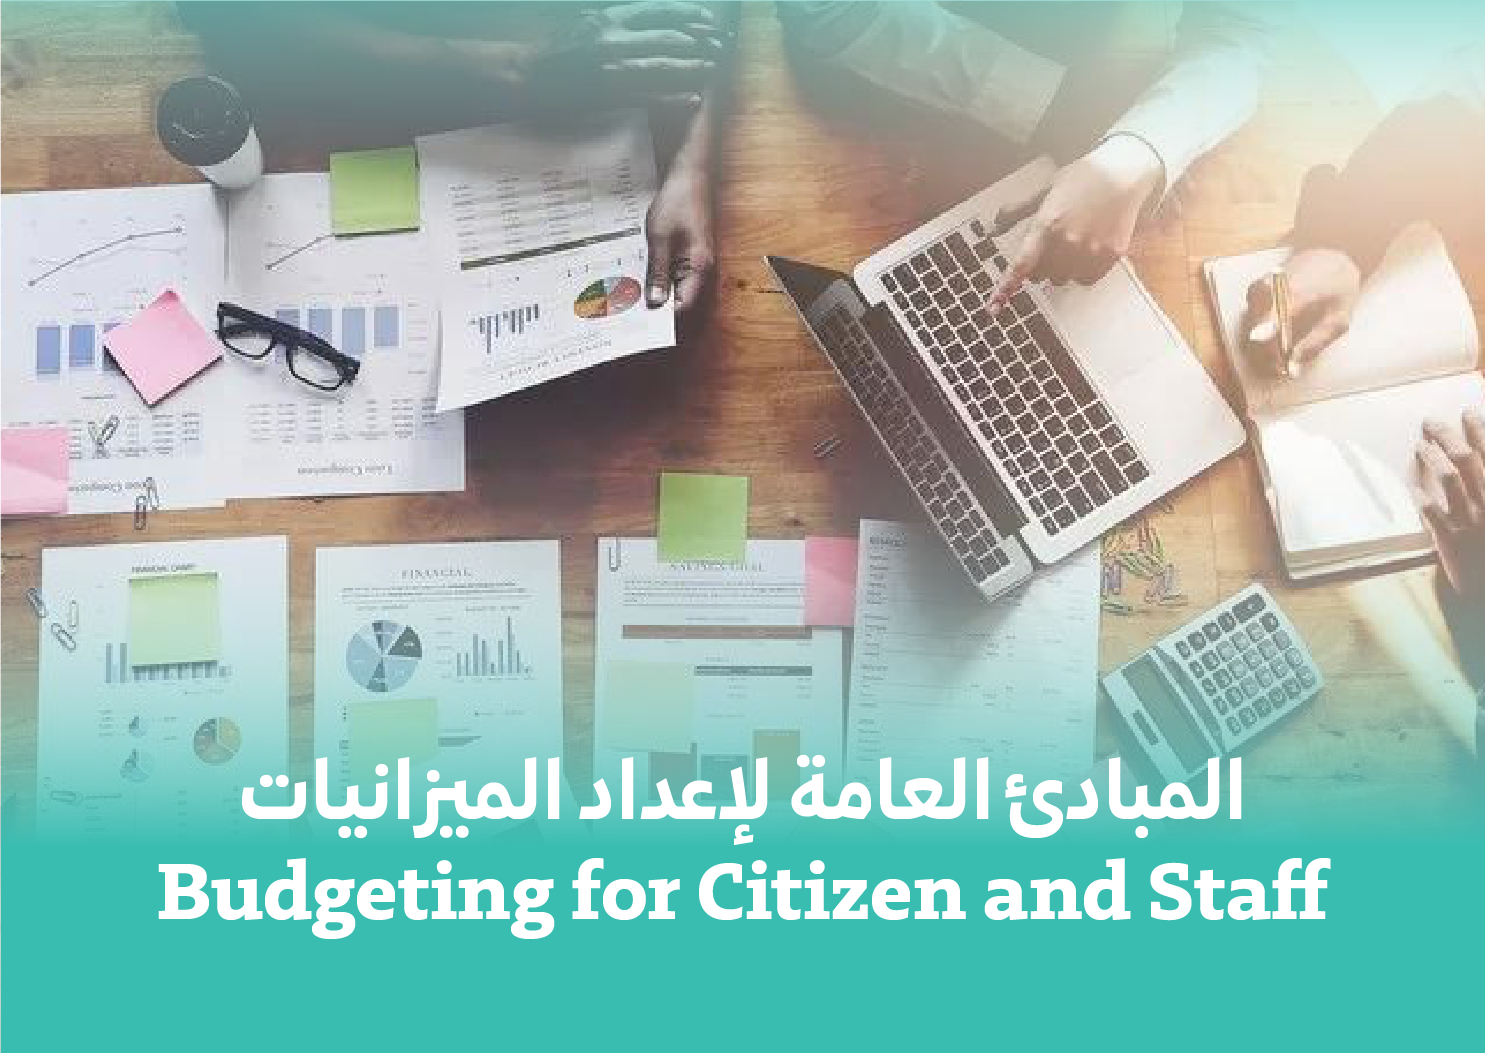 Budgeting for Citizen and Staff